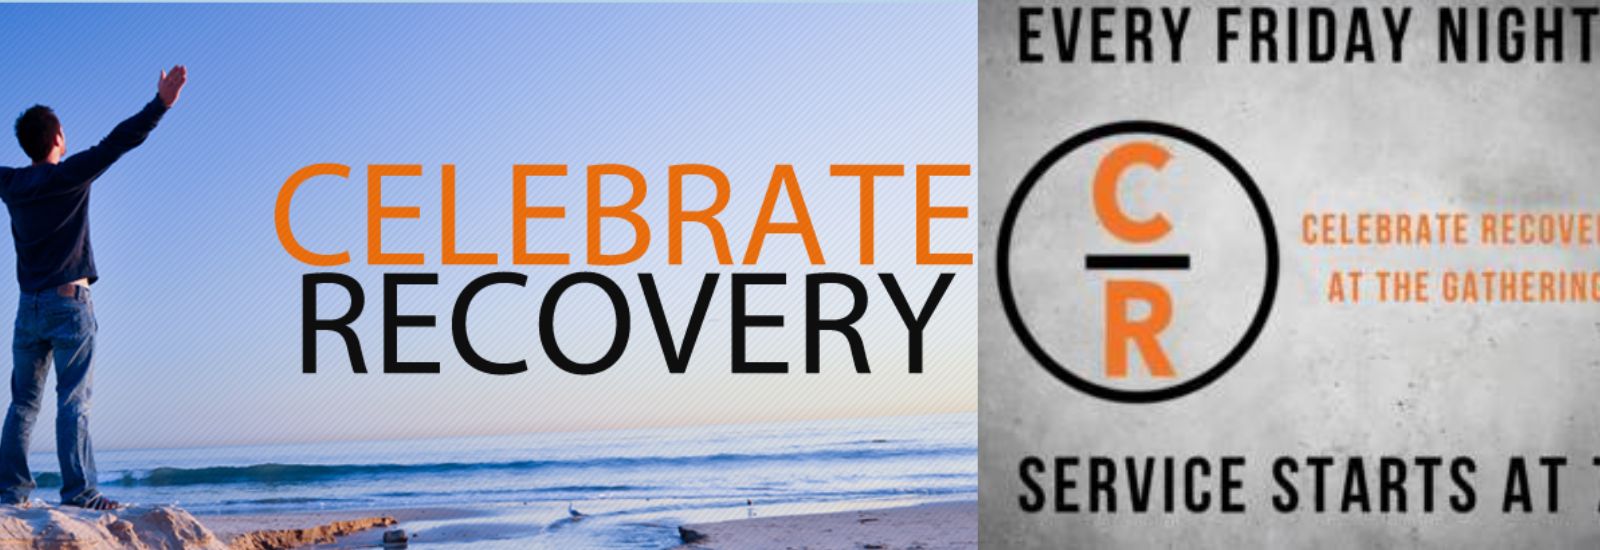 Celebrate-Recovery-Banner-1600-×-550-px